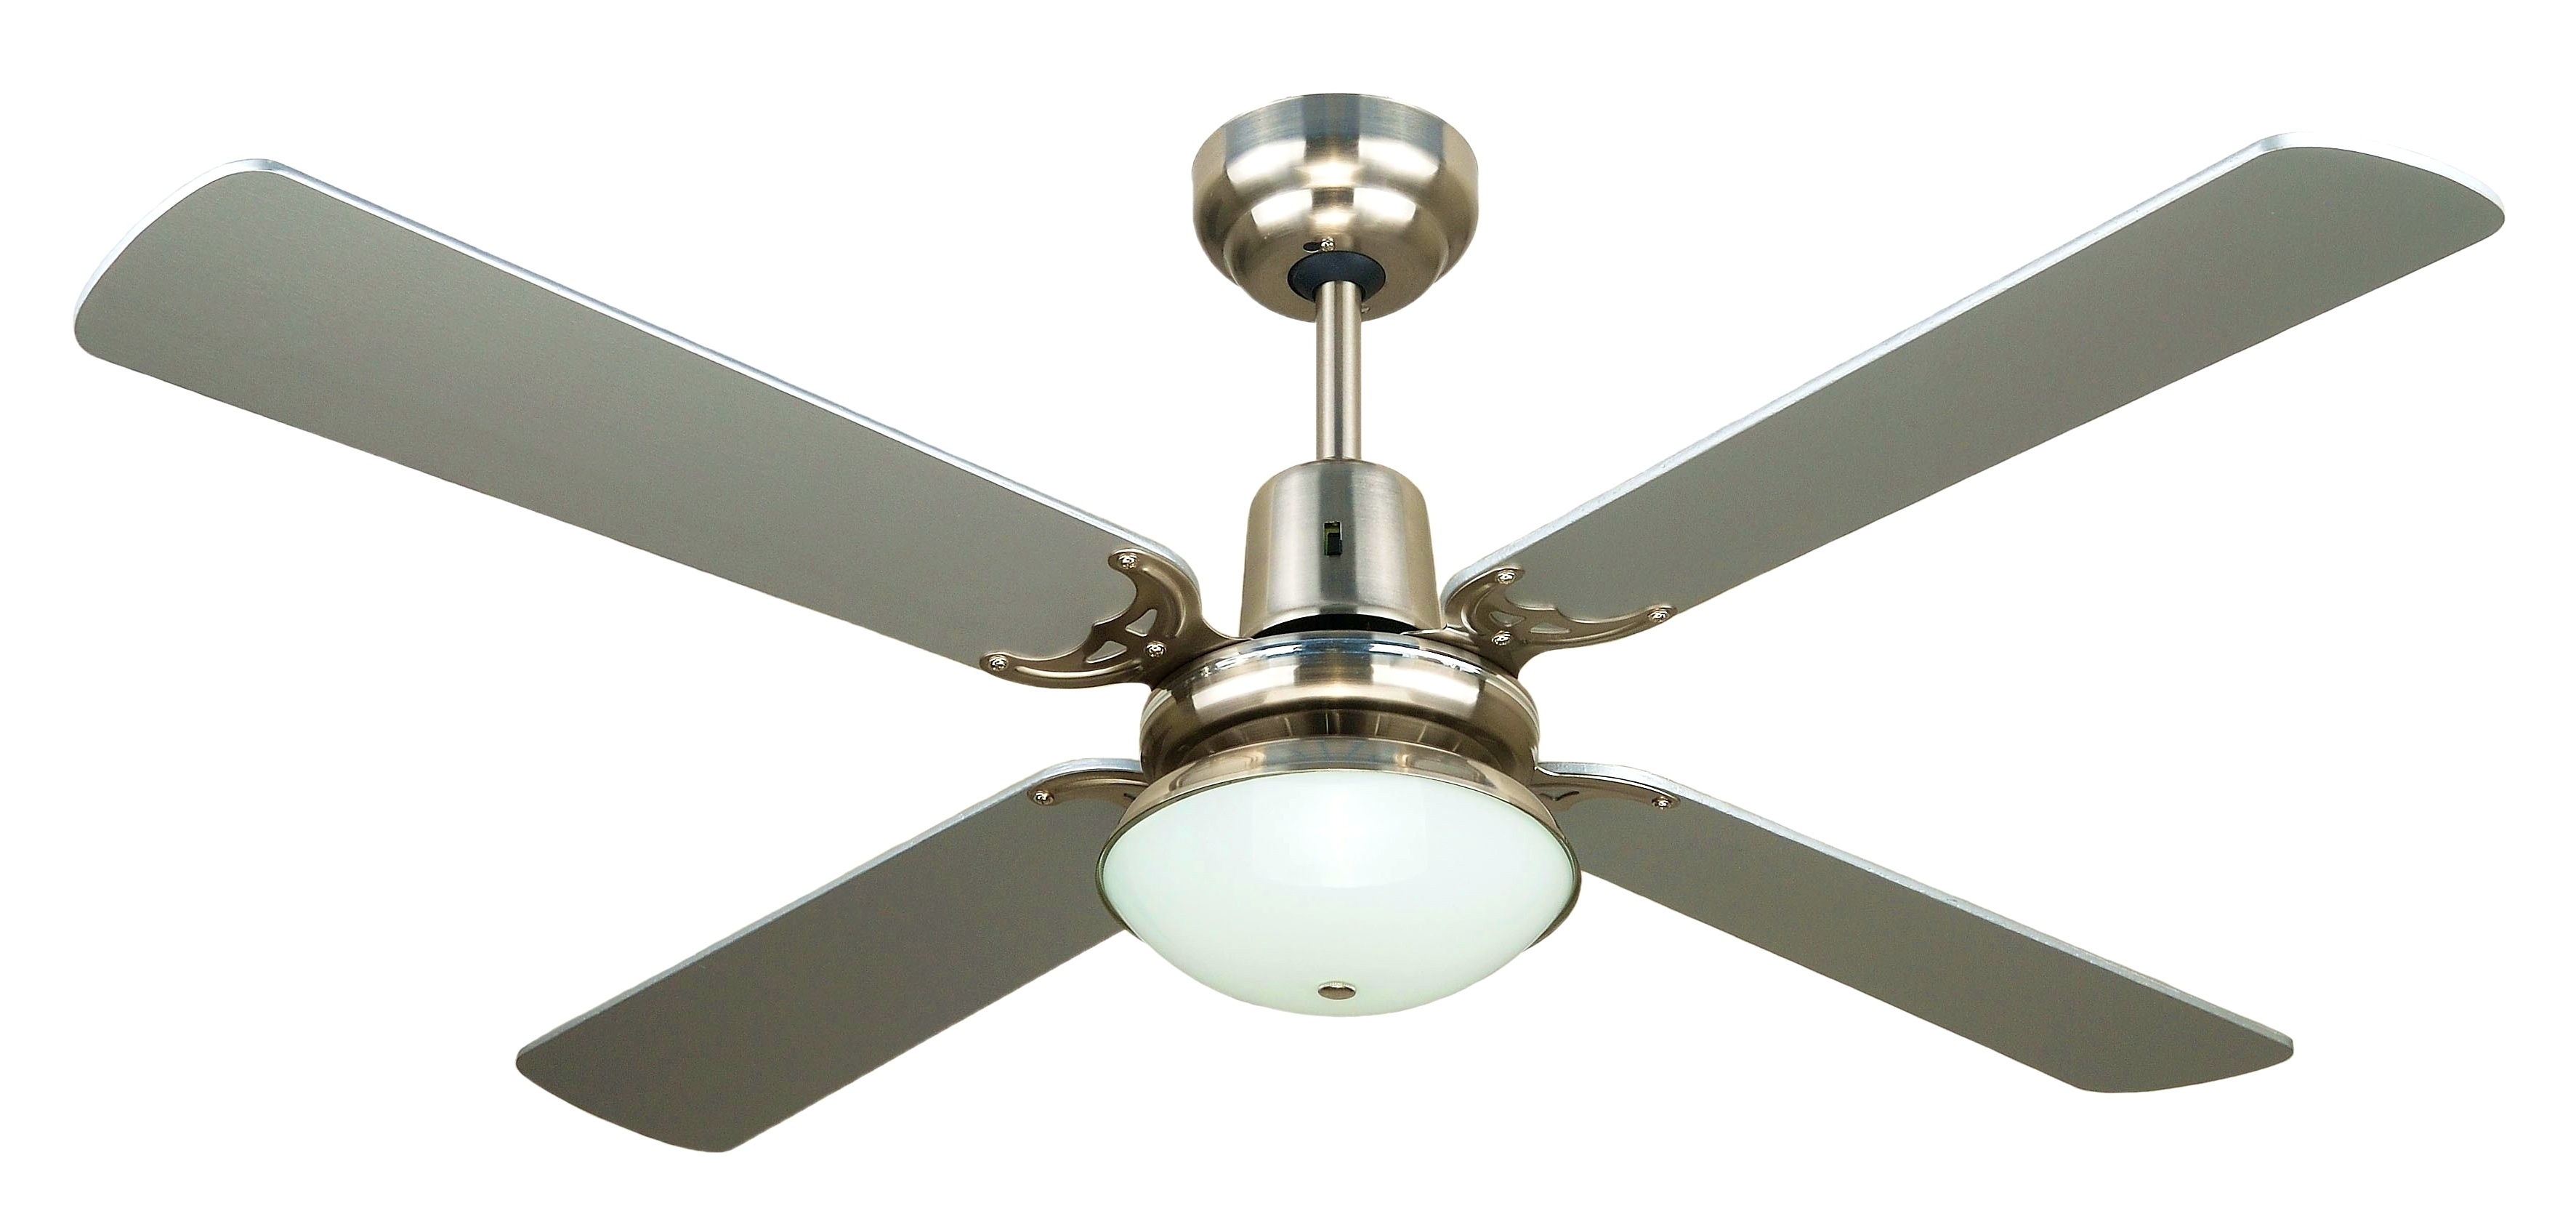 Permalink to Redington Brushed Steel Ceiling Fan With Light Kit